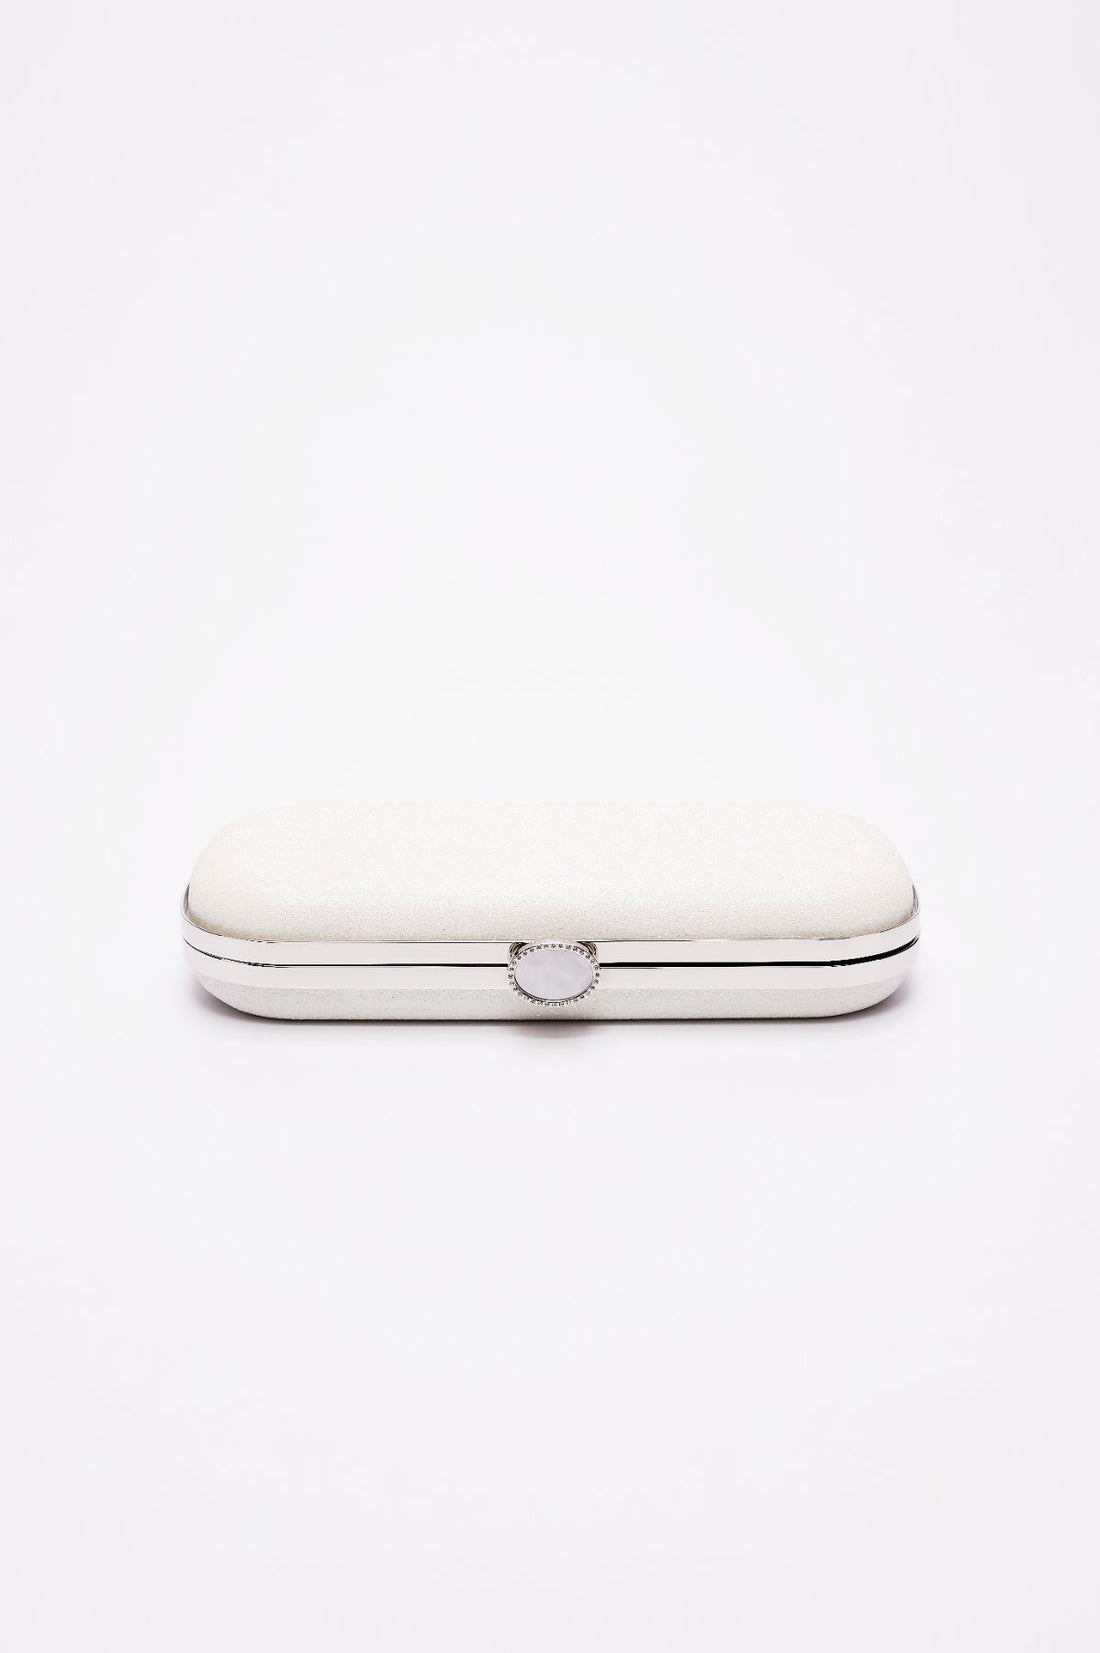 Bella Clutch in a shimmer white glitter body with a silver frame laying on side showing top clasp angle.